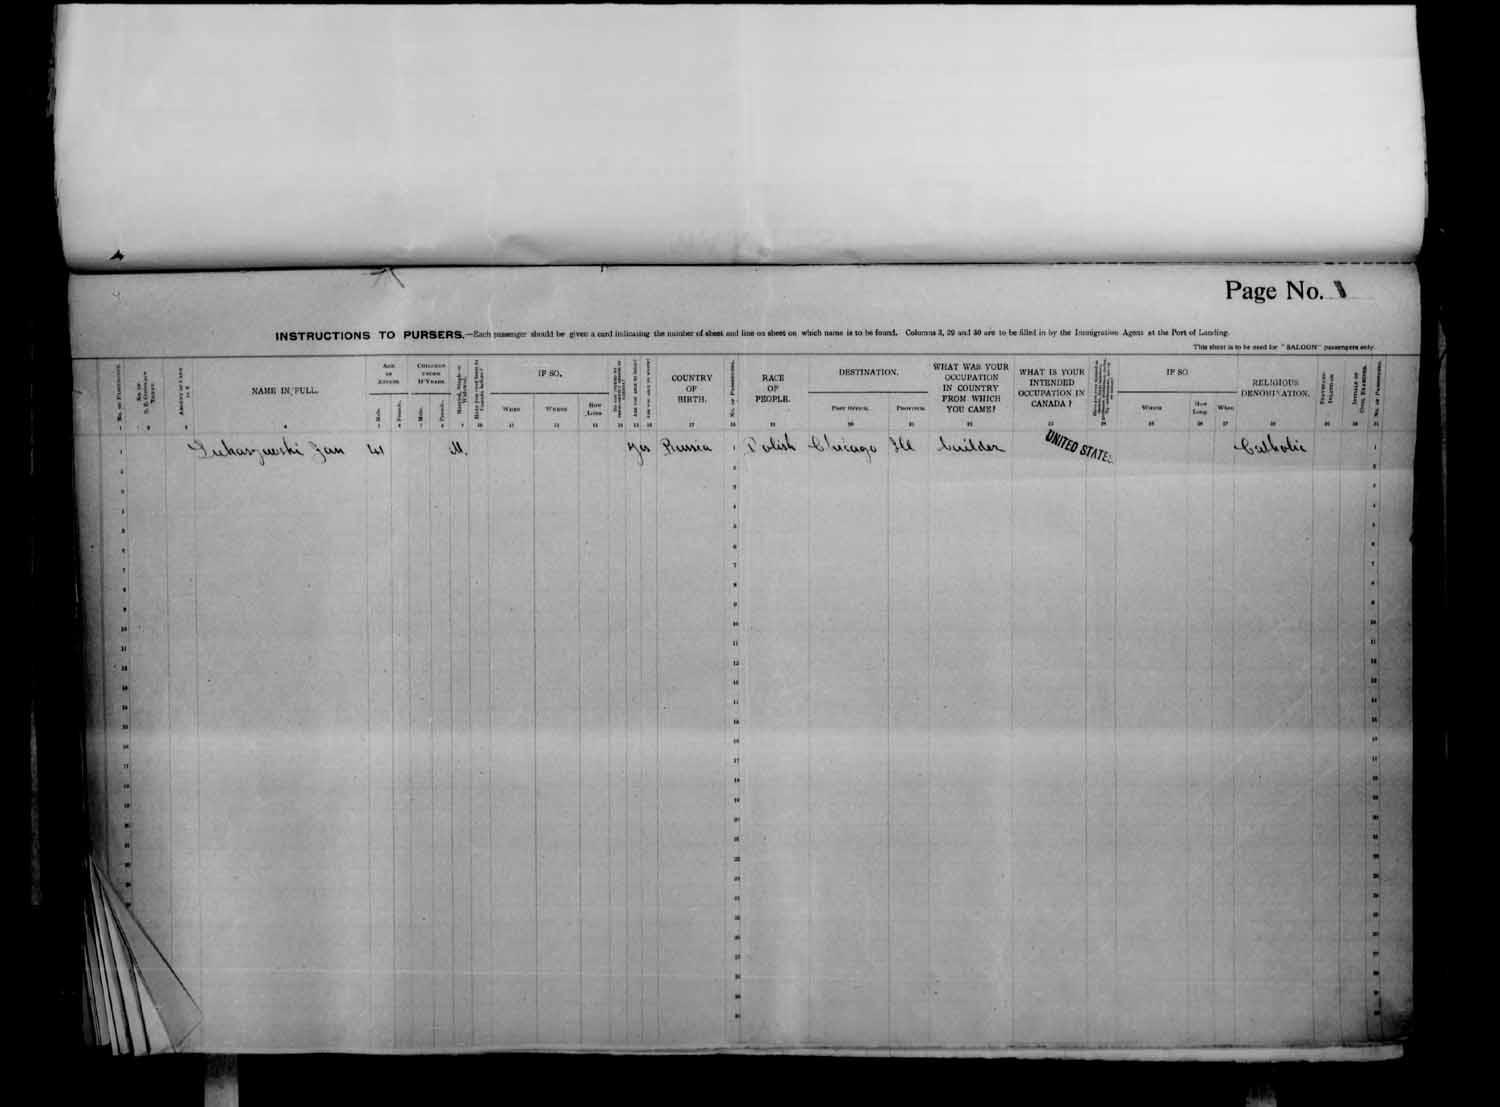 Digitized page of Passenger Lists for Image No.: e003686906